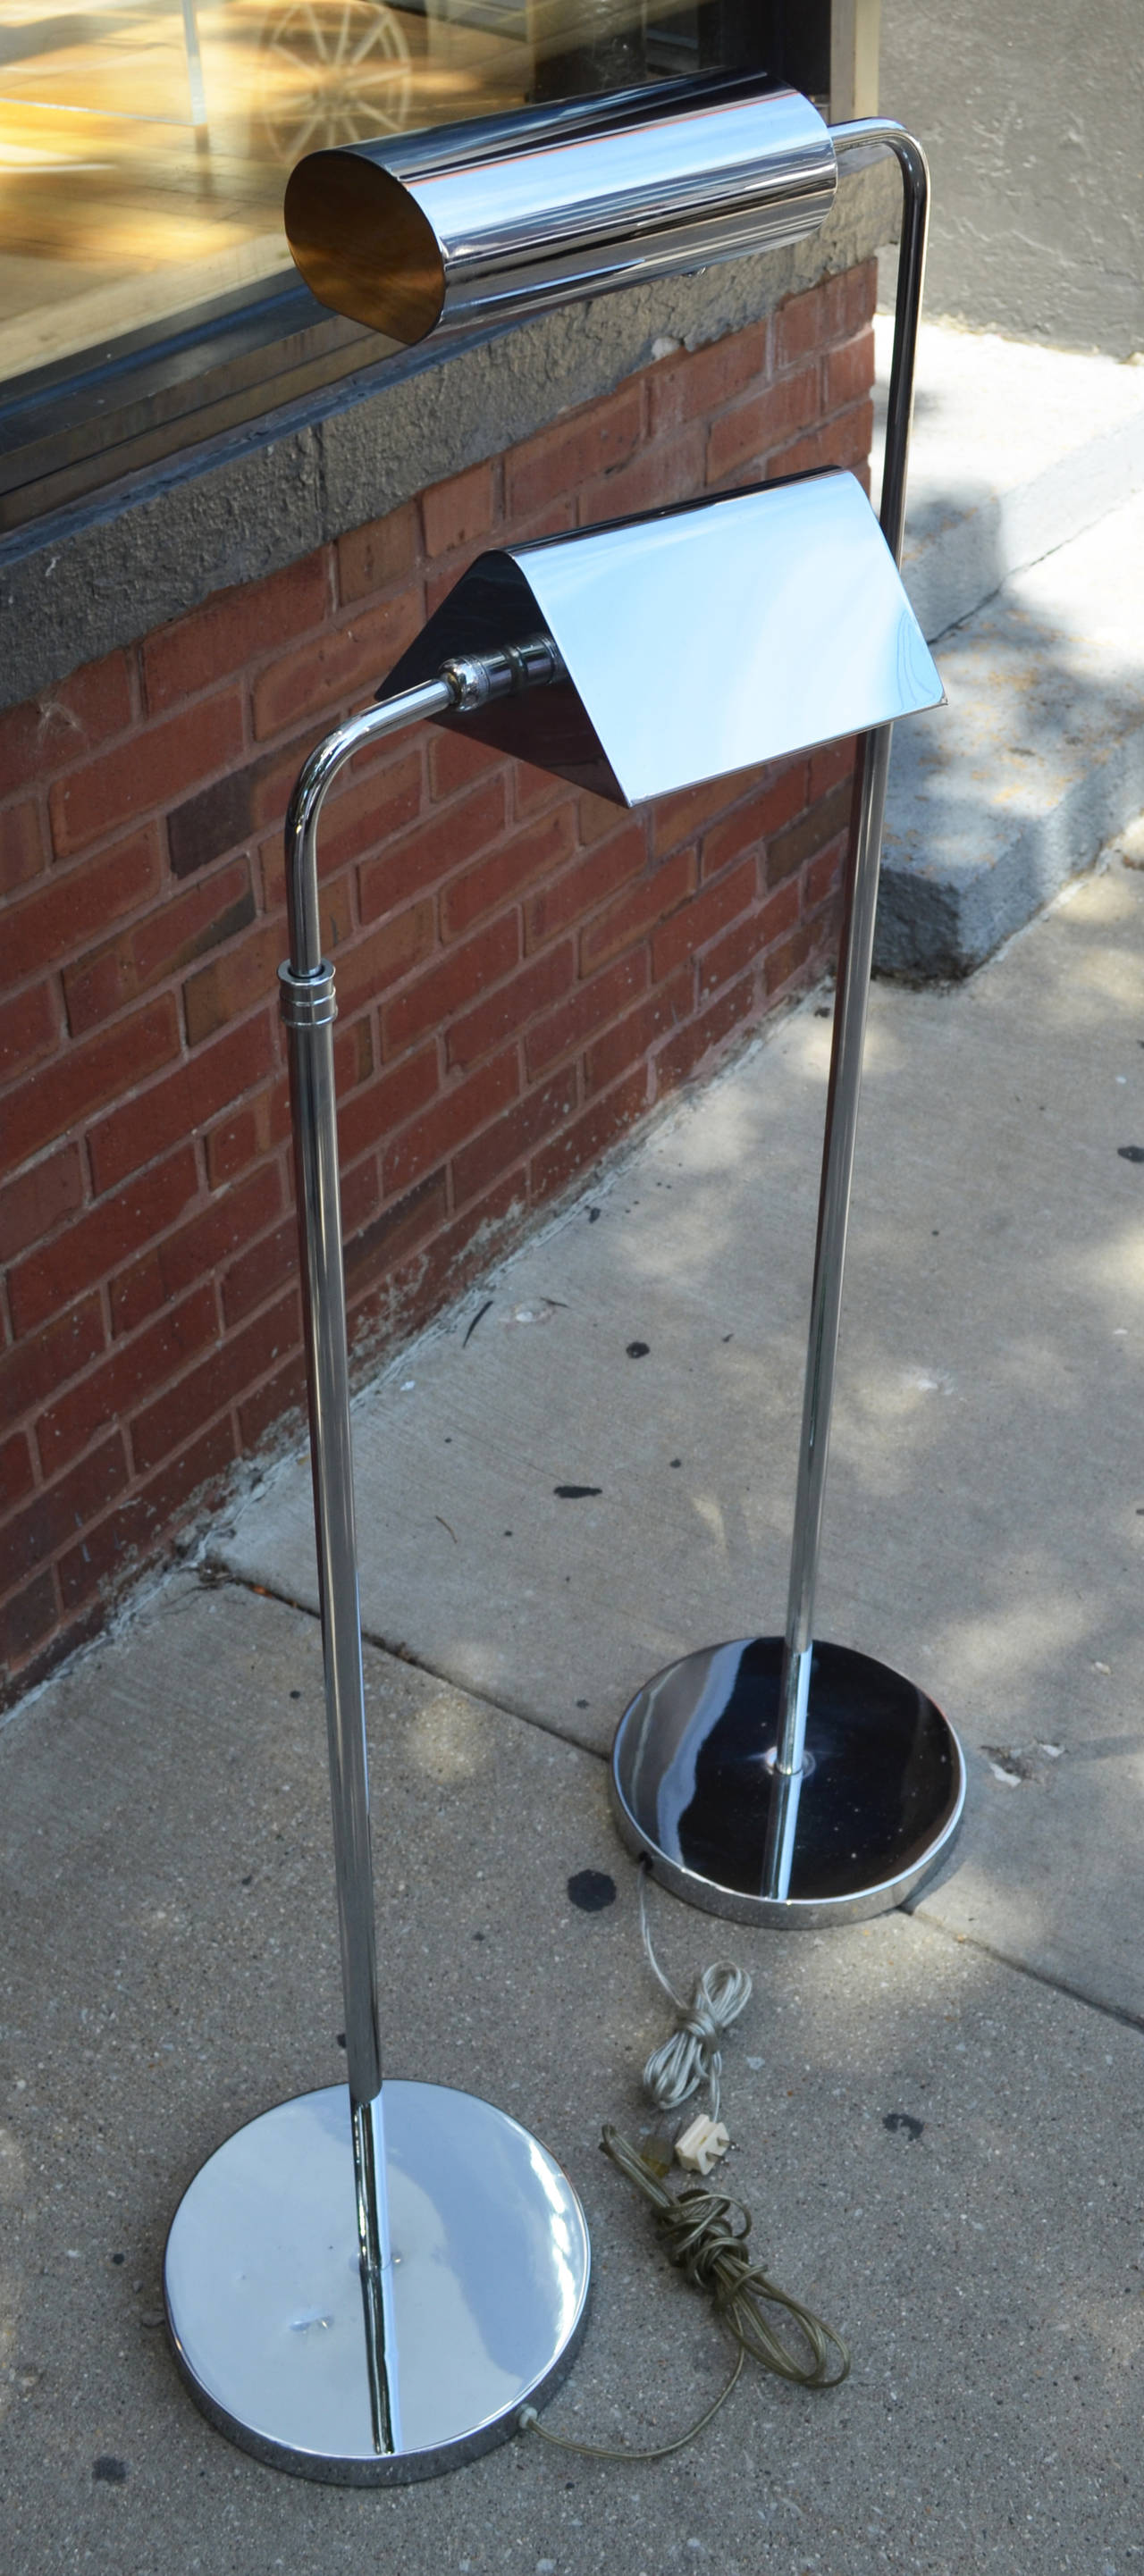 The chrome tent shade telescoping pharmacy floor lamp has been sold.
The  articulating floor lamp with an elongated tube shade is still available.
The Koch & Lowy floor lamp has a dimmer switch.
Sold individually $975 each.